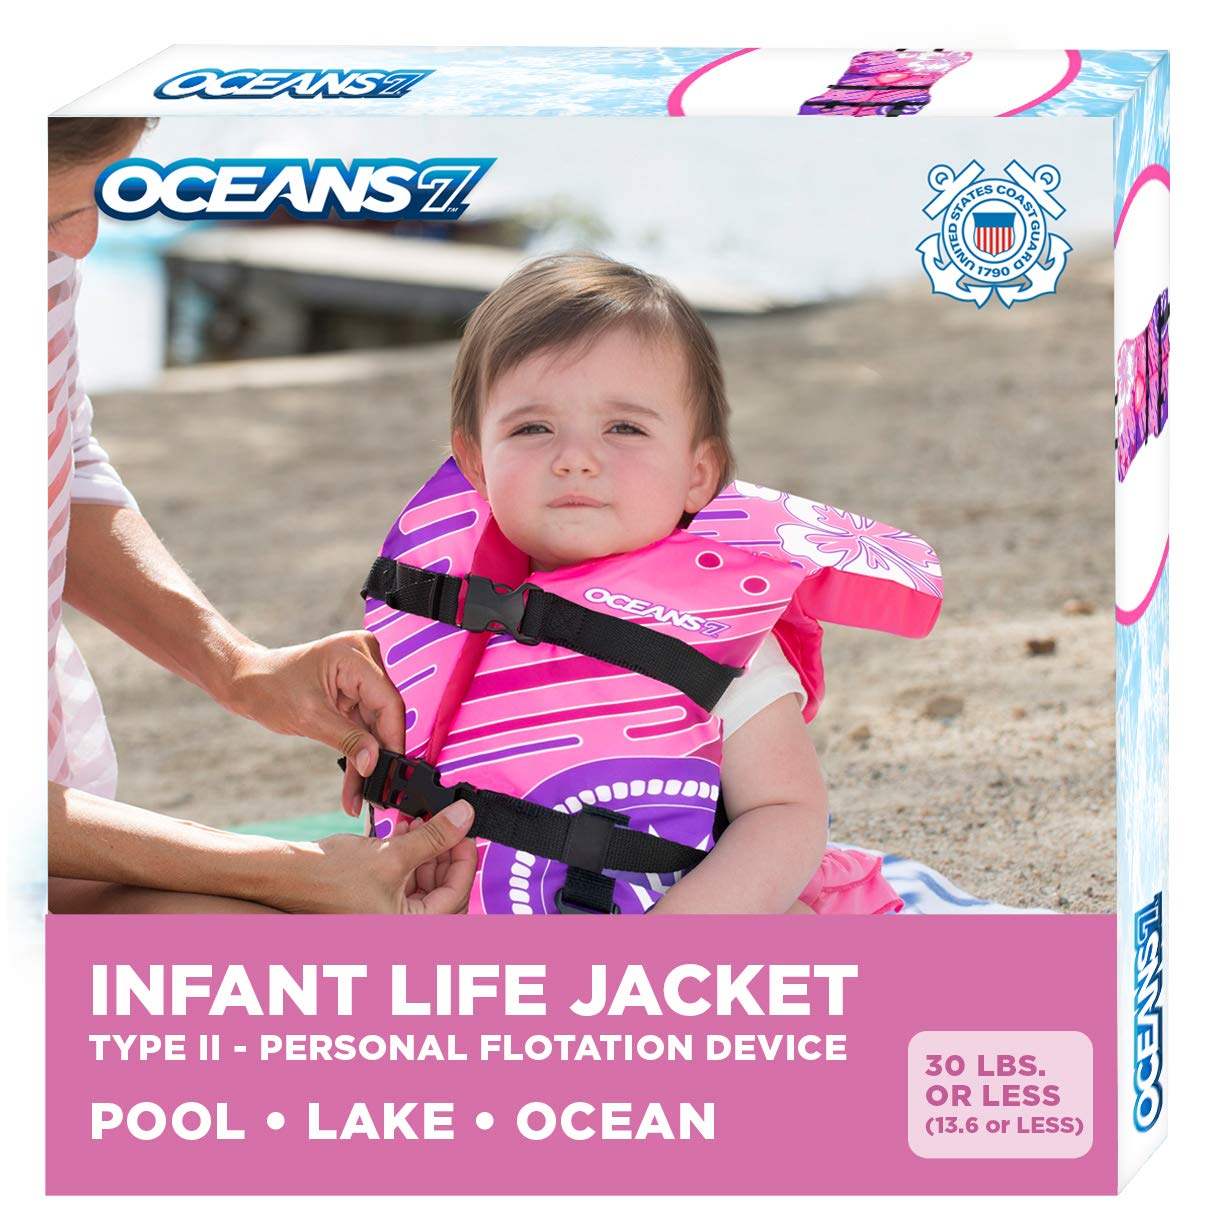 Oceans 7 - United States Coast Guard Approved - Adult Life Jacket Vest Type  III Vest PFD Personal Flotation Device